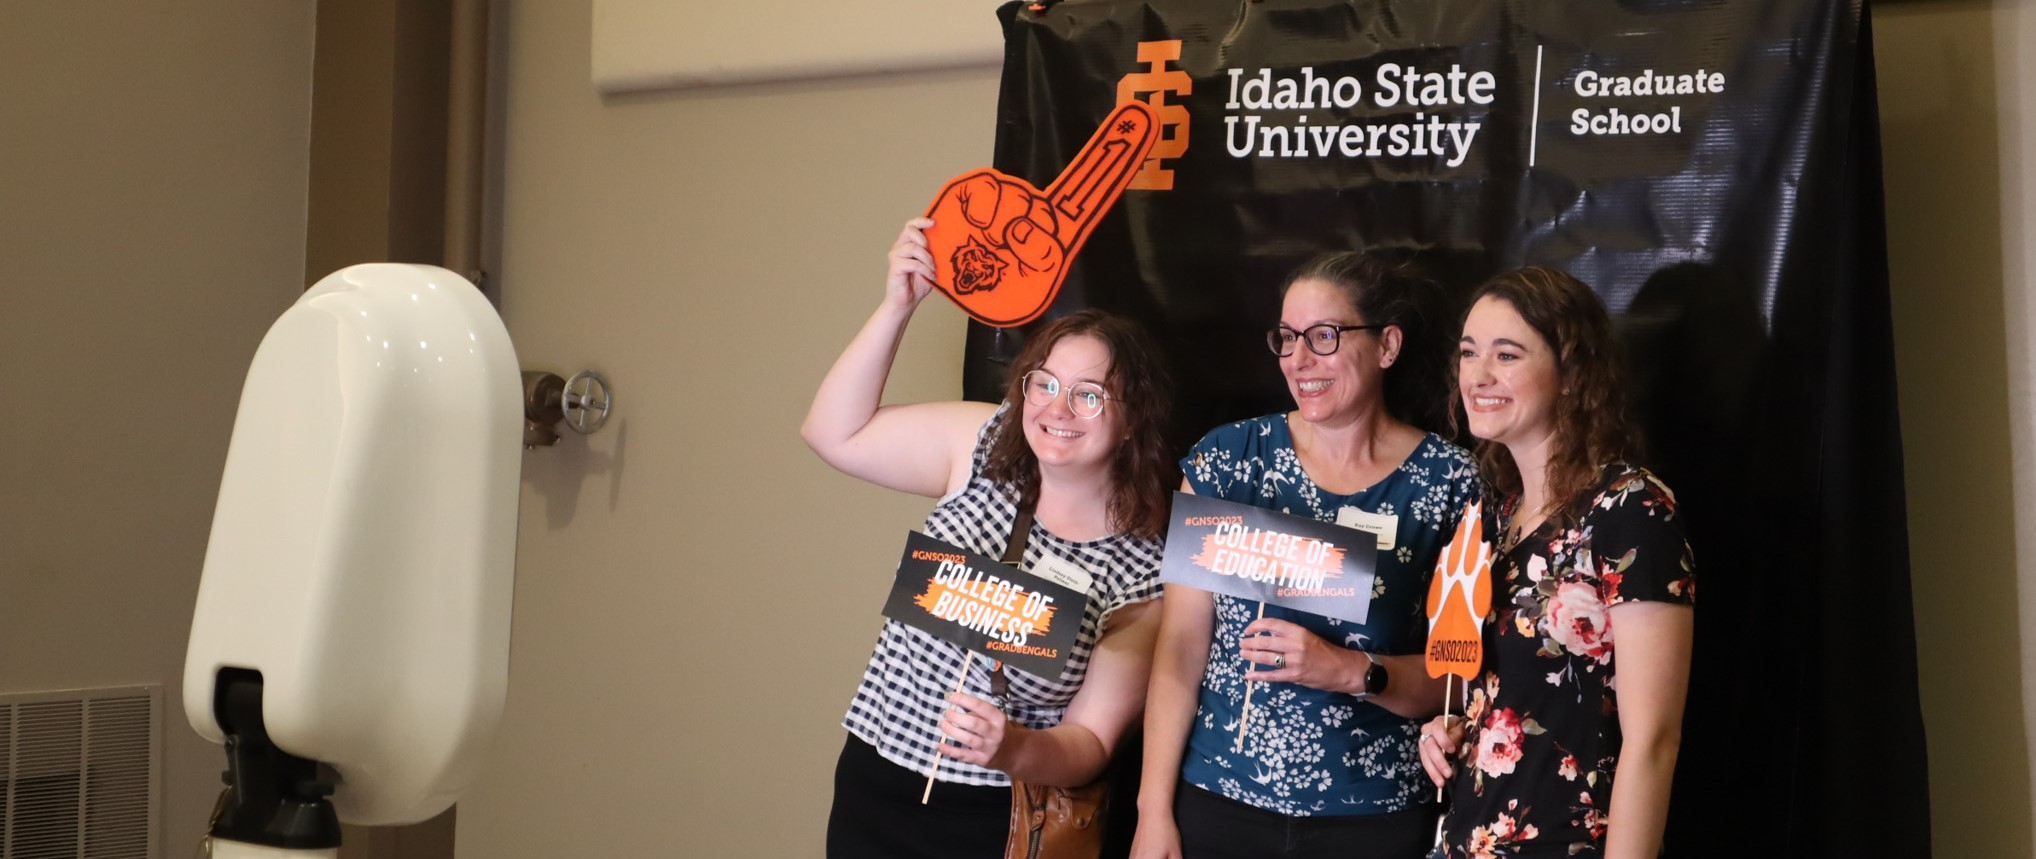 Three students holding up props and taking a photo at the photobooth